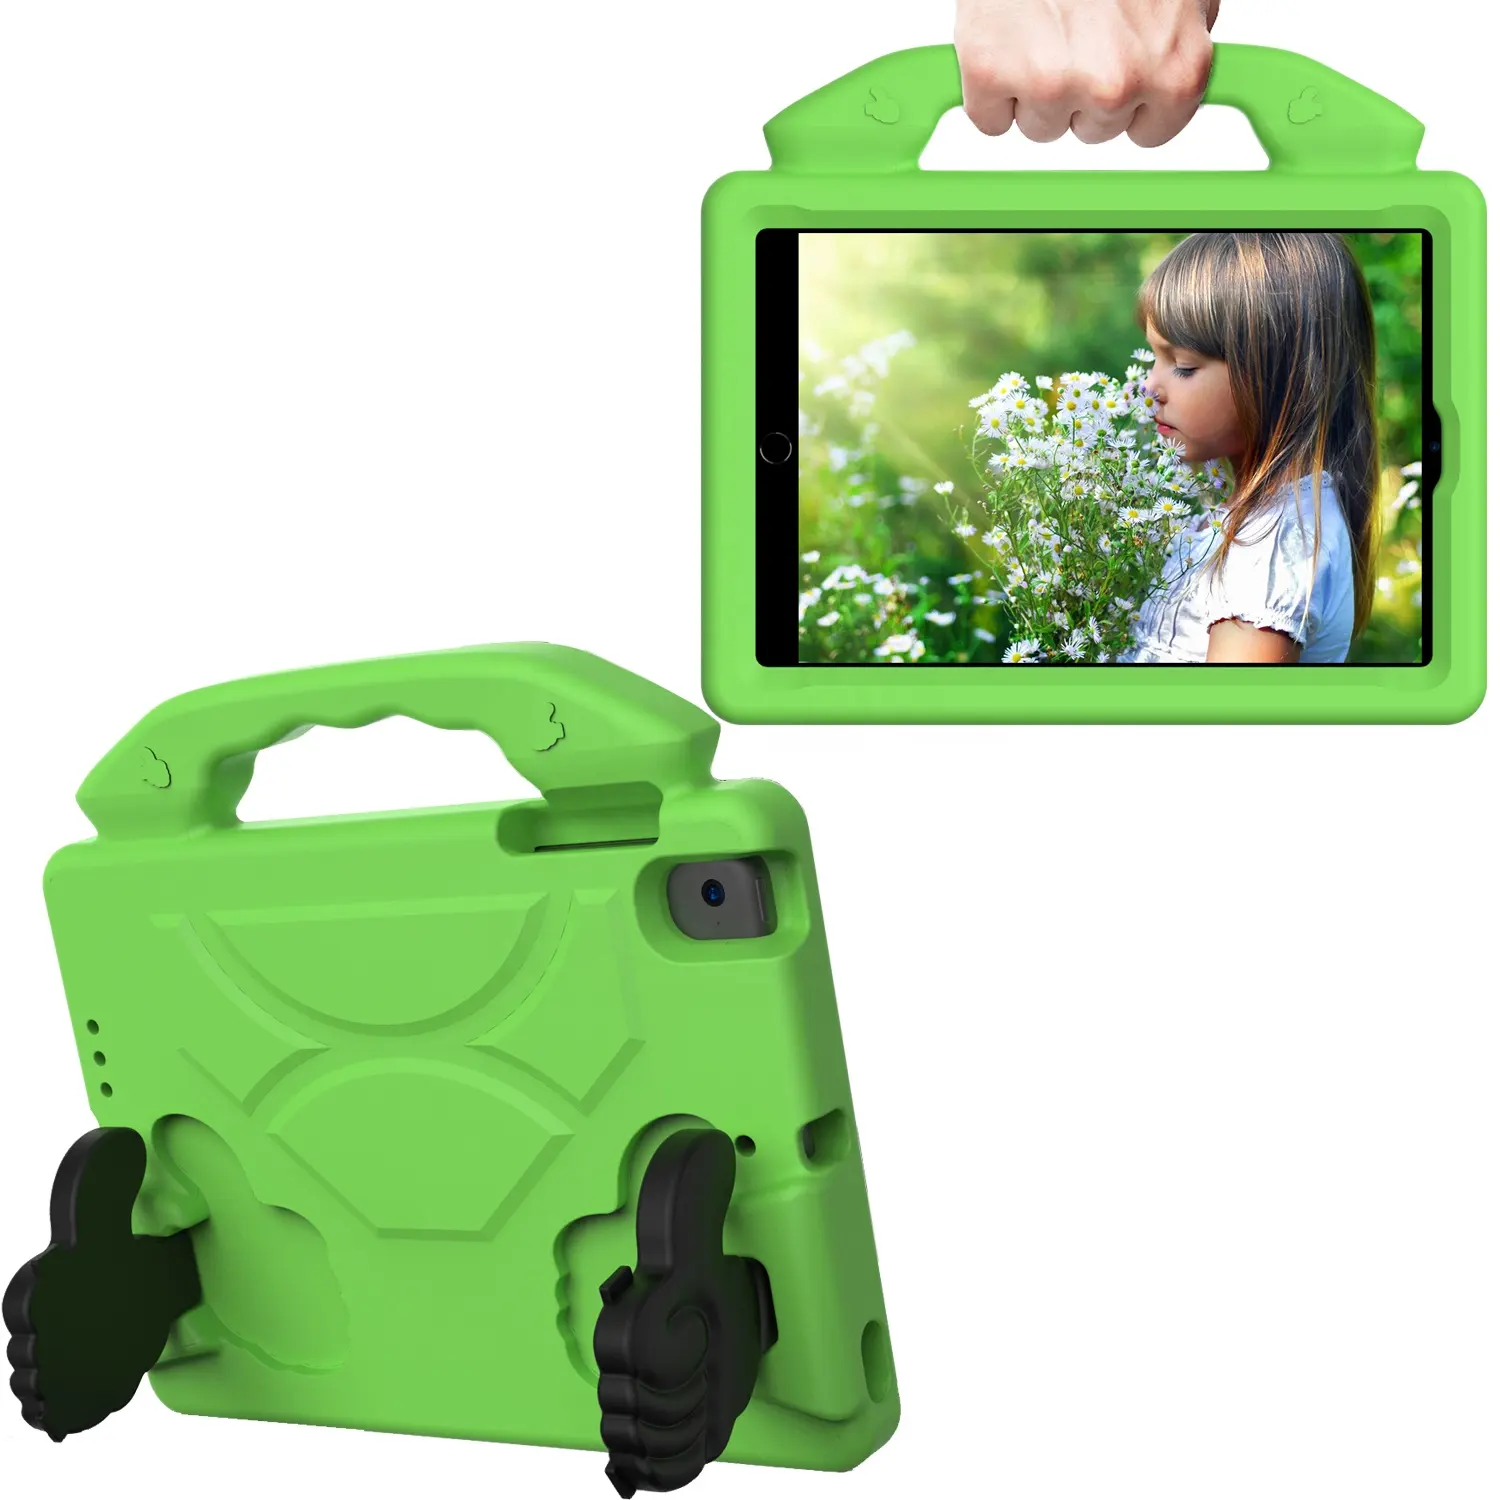 Shockproof Portable Kids Tablet Handle EVA Cover Case For Apple iPad Mini 1 2 3 4 5 7.9 inch Tablet